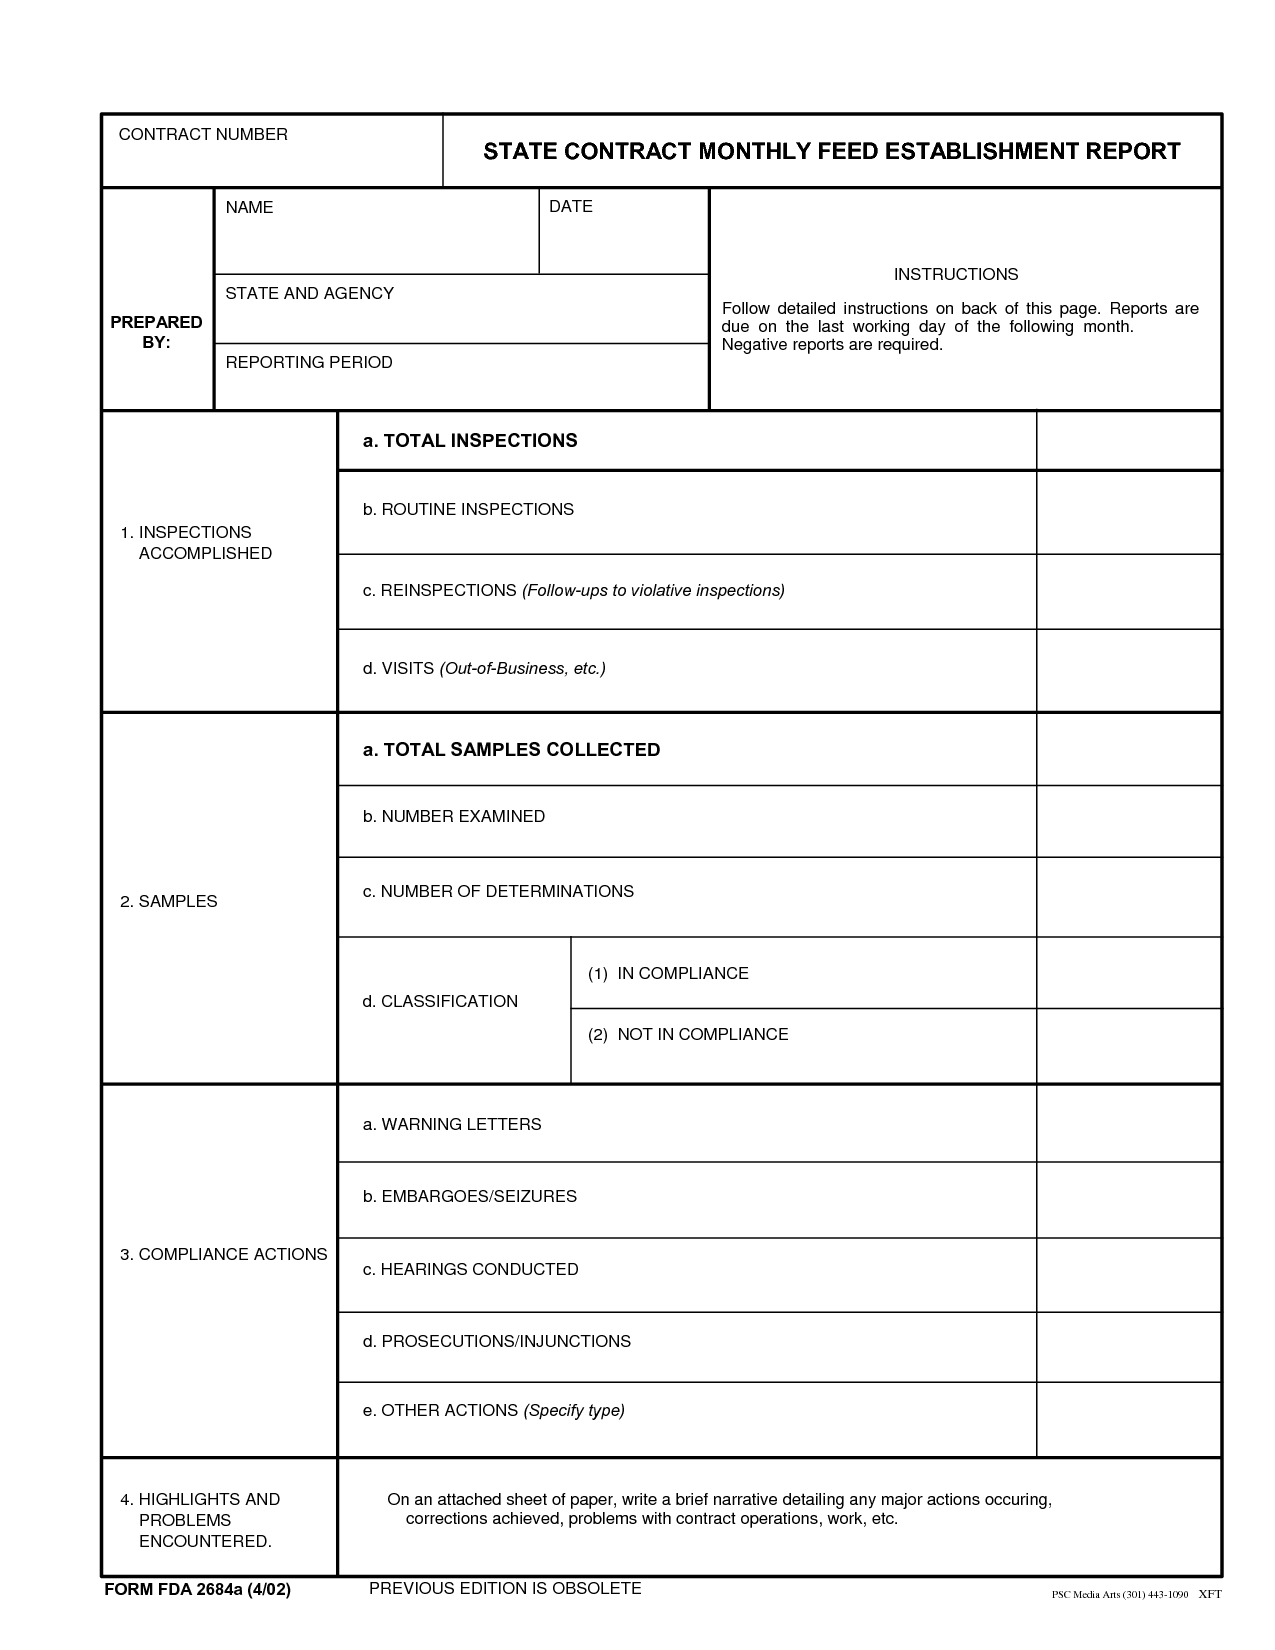 State Report Template ] - Printable Writing Templates Inside State Report Template